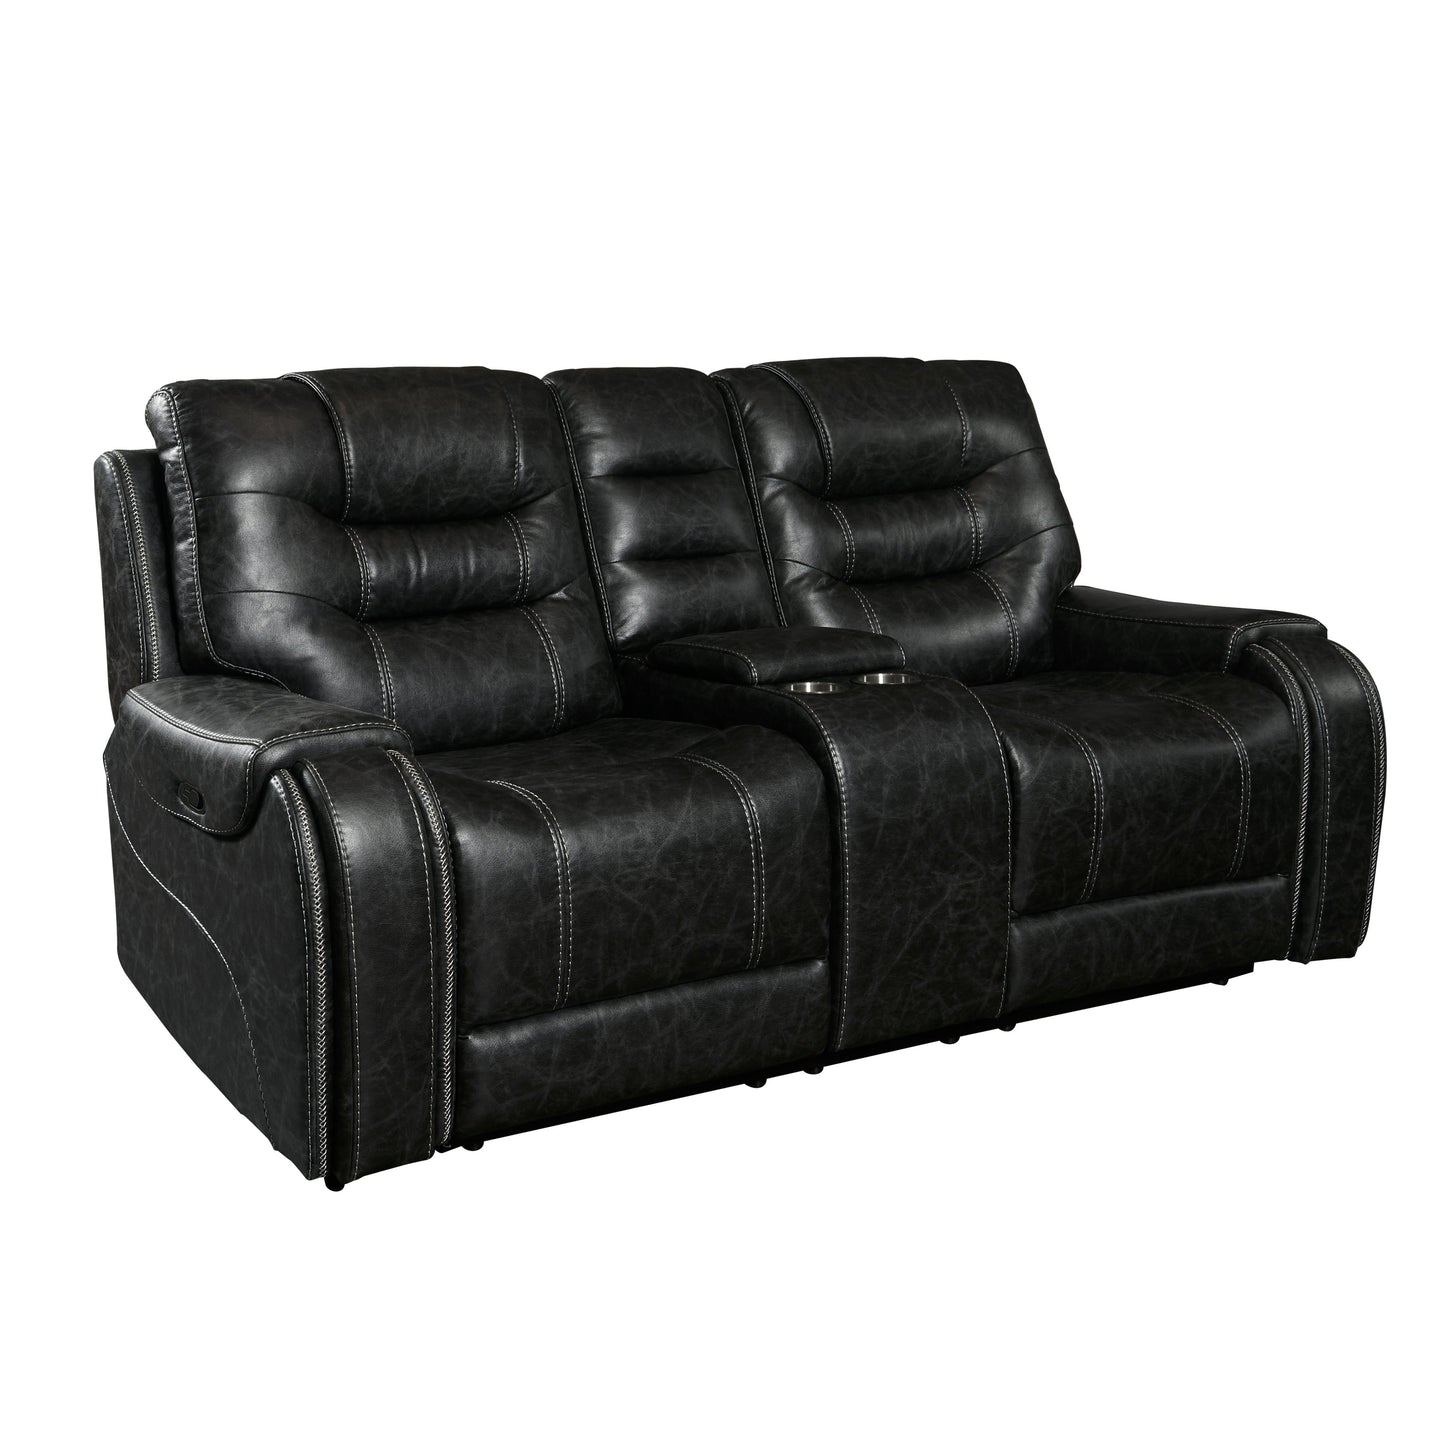 Rowena Contemporary Faux Leather Reclining Loveseat with Console, Smoke